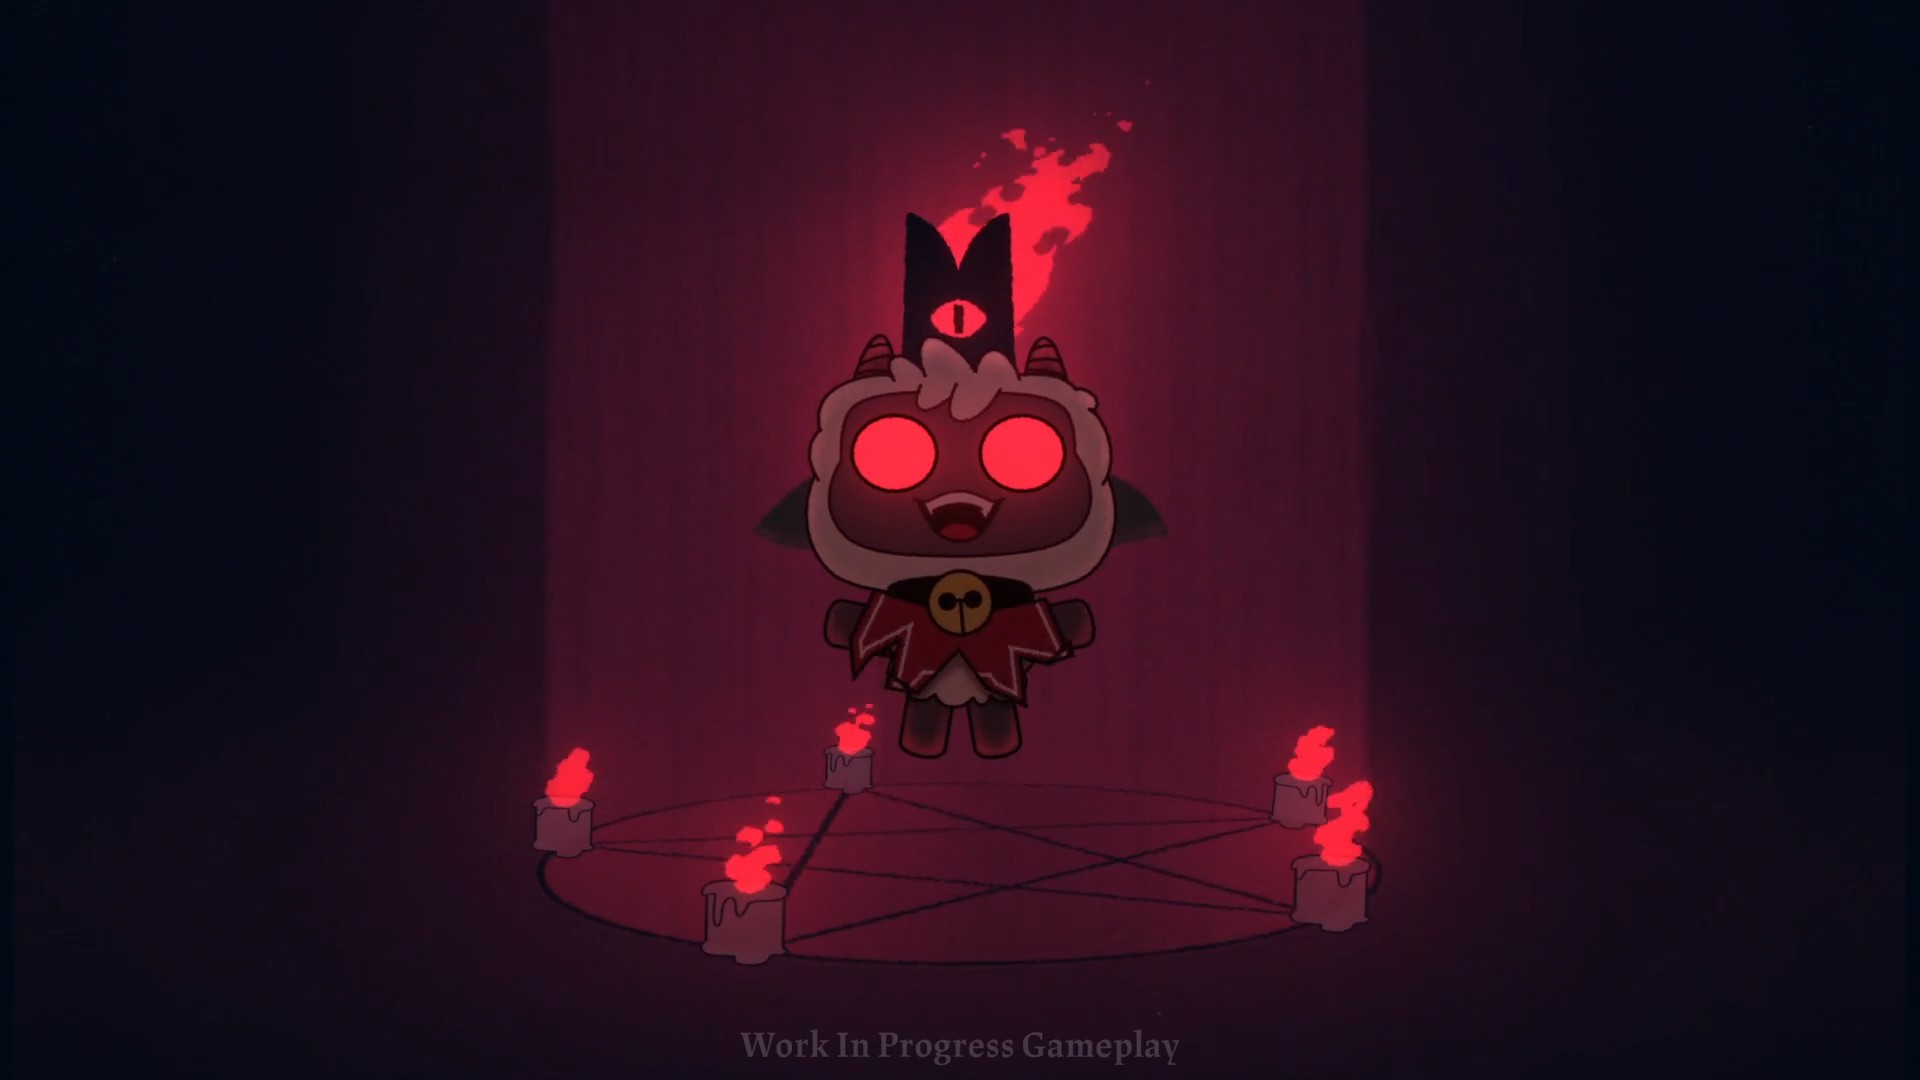 The main character of Cult of the Lamb, Lambert ; a lamb wearing a red cloak fastened with a bell at the collar. He is wearing a two-pronged crown on his head as he is being lifted in the air. He is above a pentagram with a lit candle on each of the five points